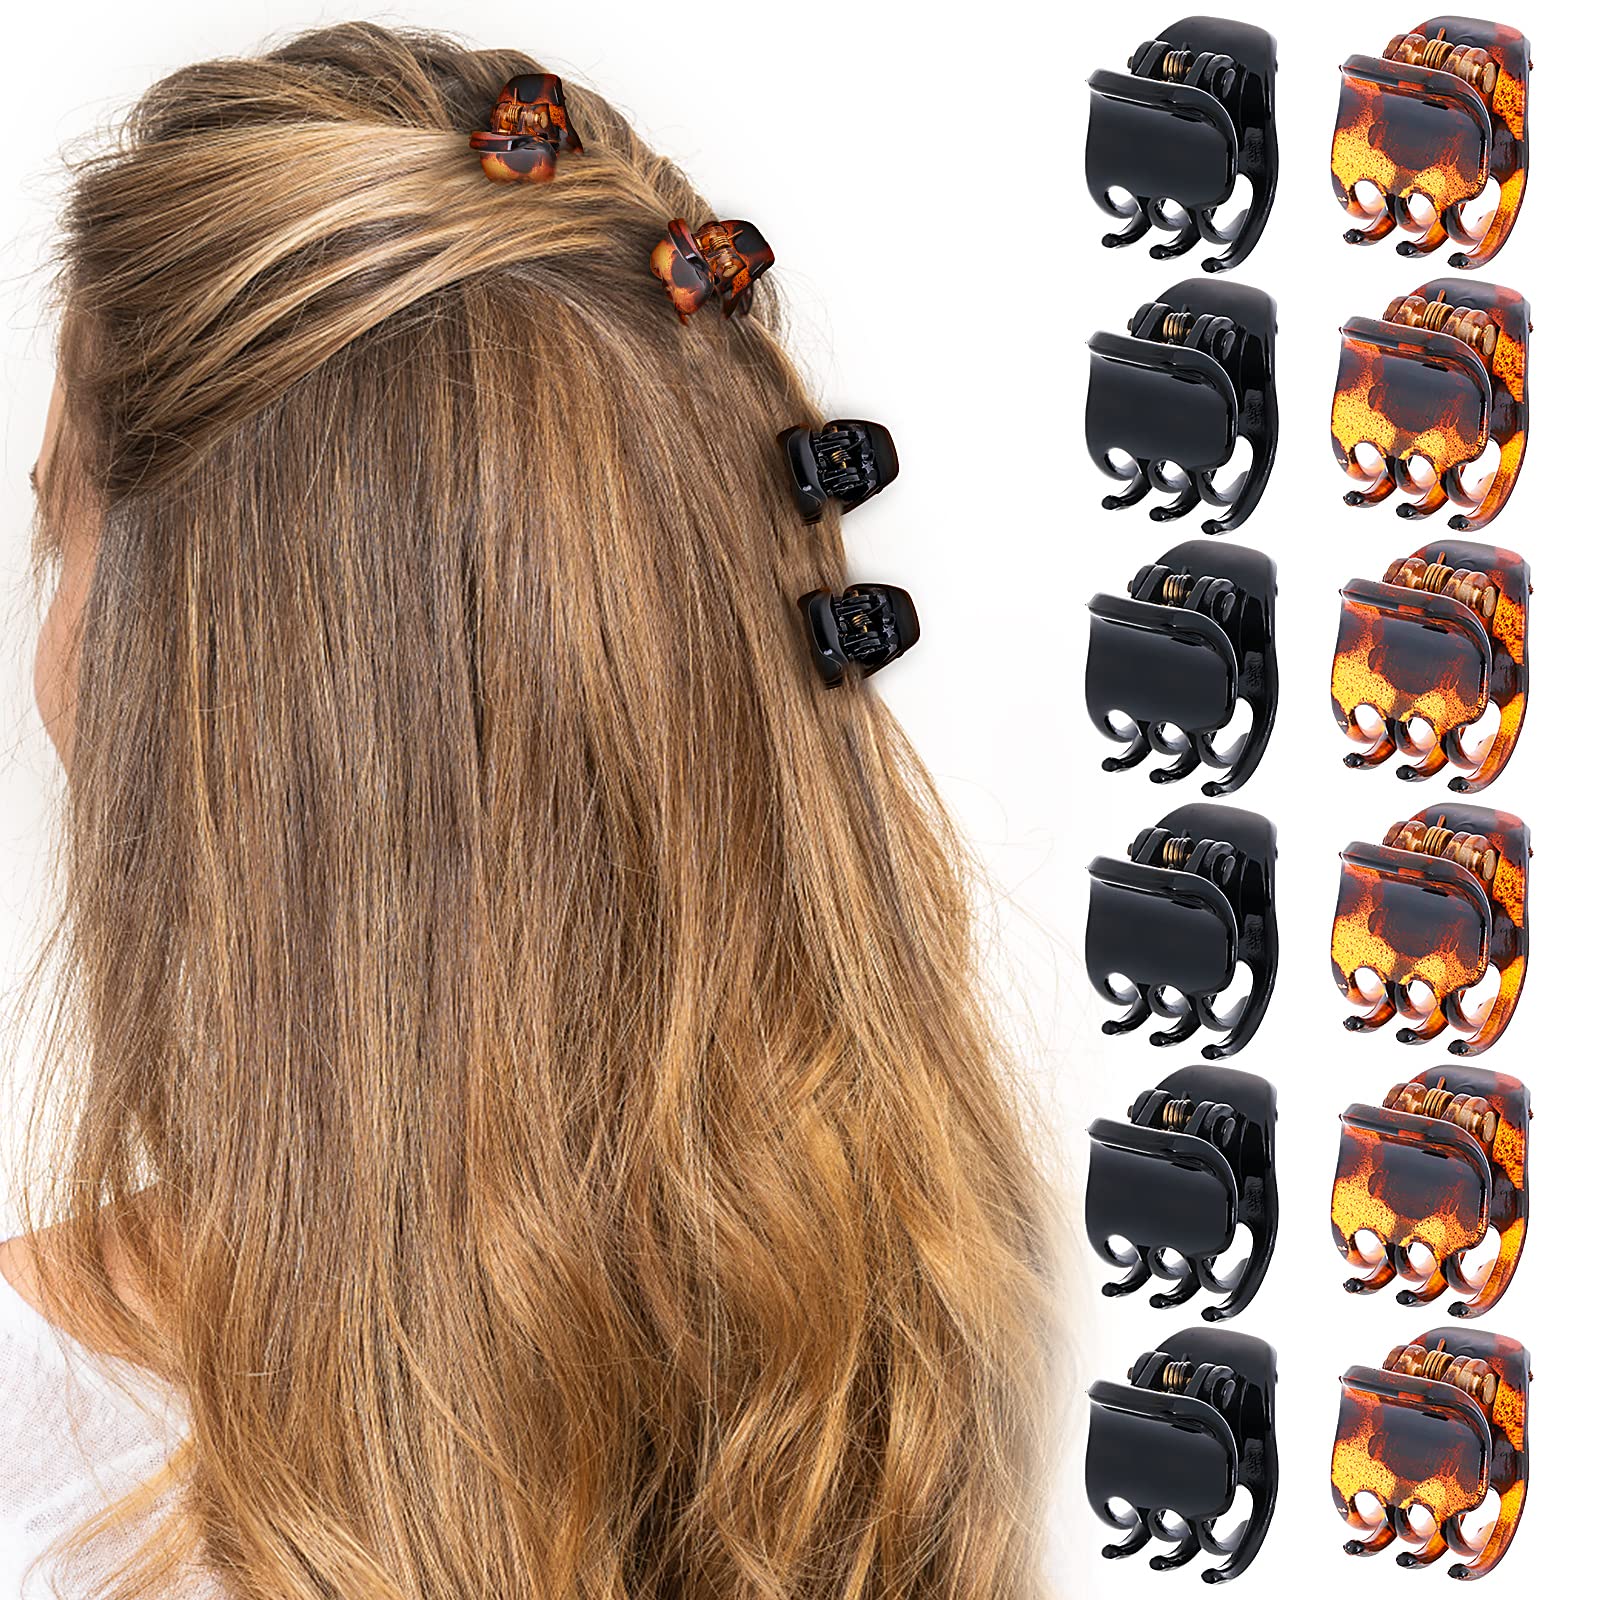  Hoyols 48 Pcs Small Mini Clips for Hair, Tiny Jaw Hair clip  Brown Hair Claw Clip for Makeup Thin Short Fine Grip for Women Girls Hair  Styling Plastic Hair Accessories